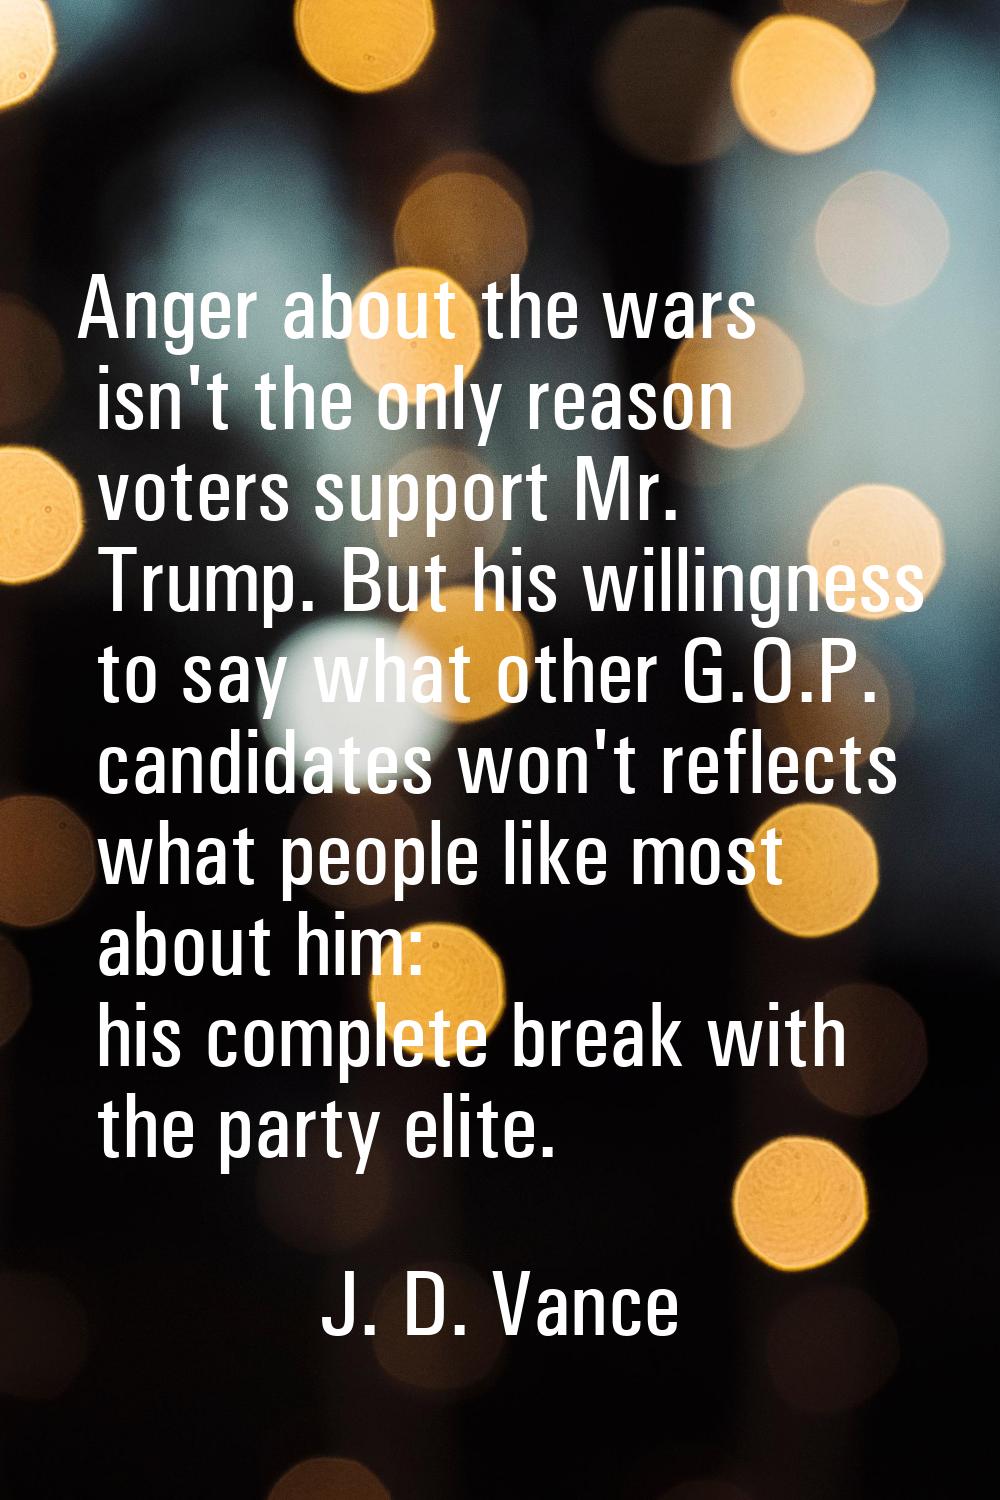 Anger about the wars isn't the only reason voters support Mr. Trump. But his willingness to say wha